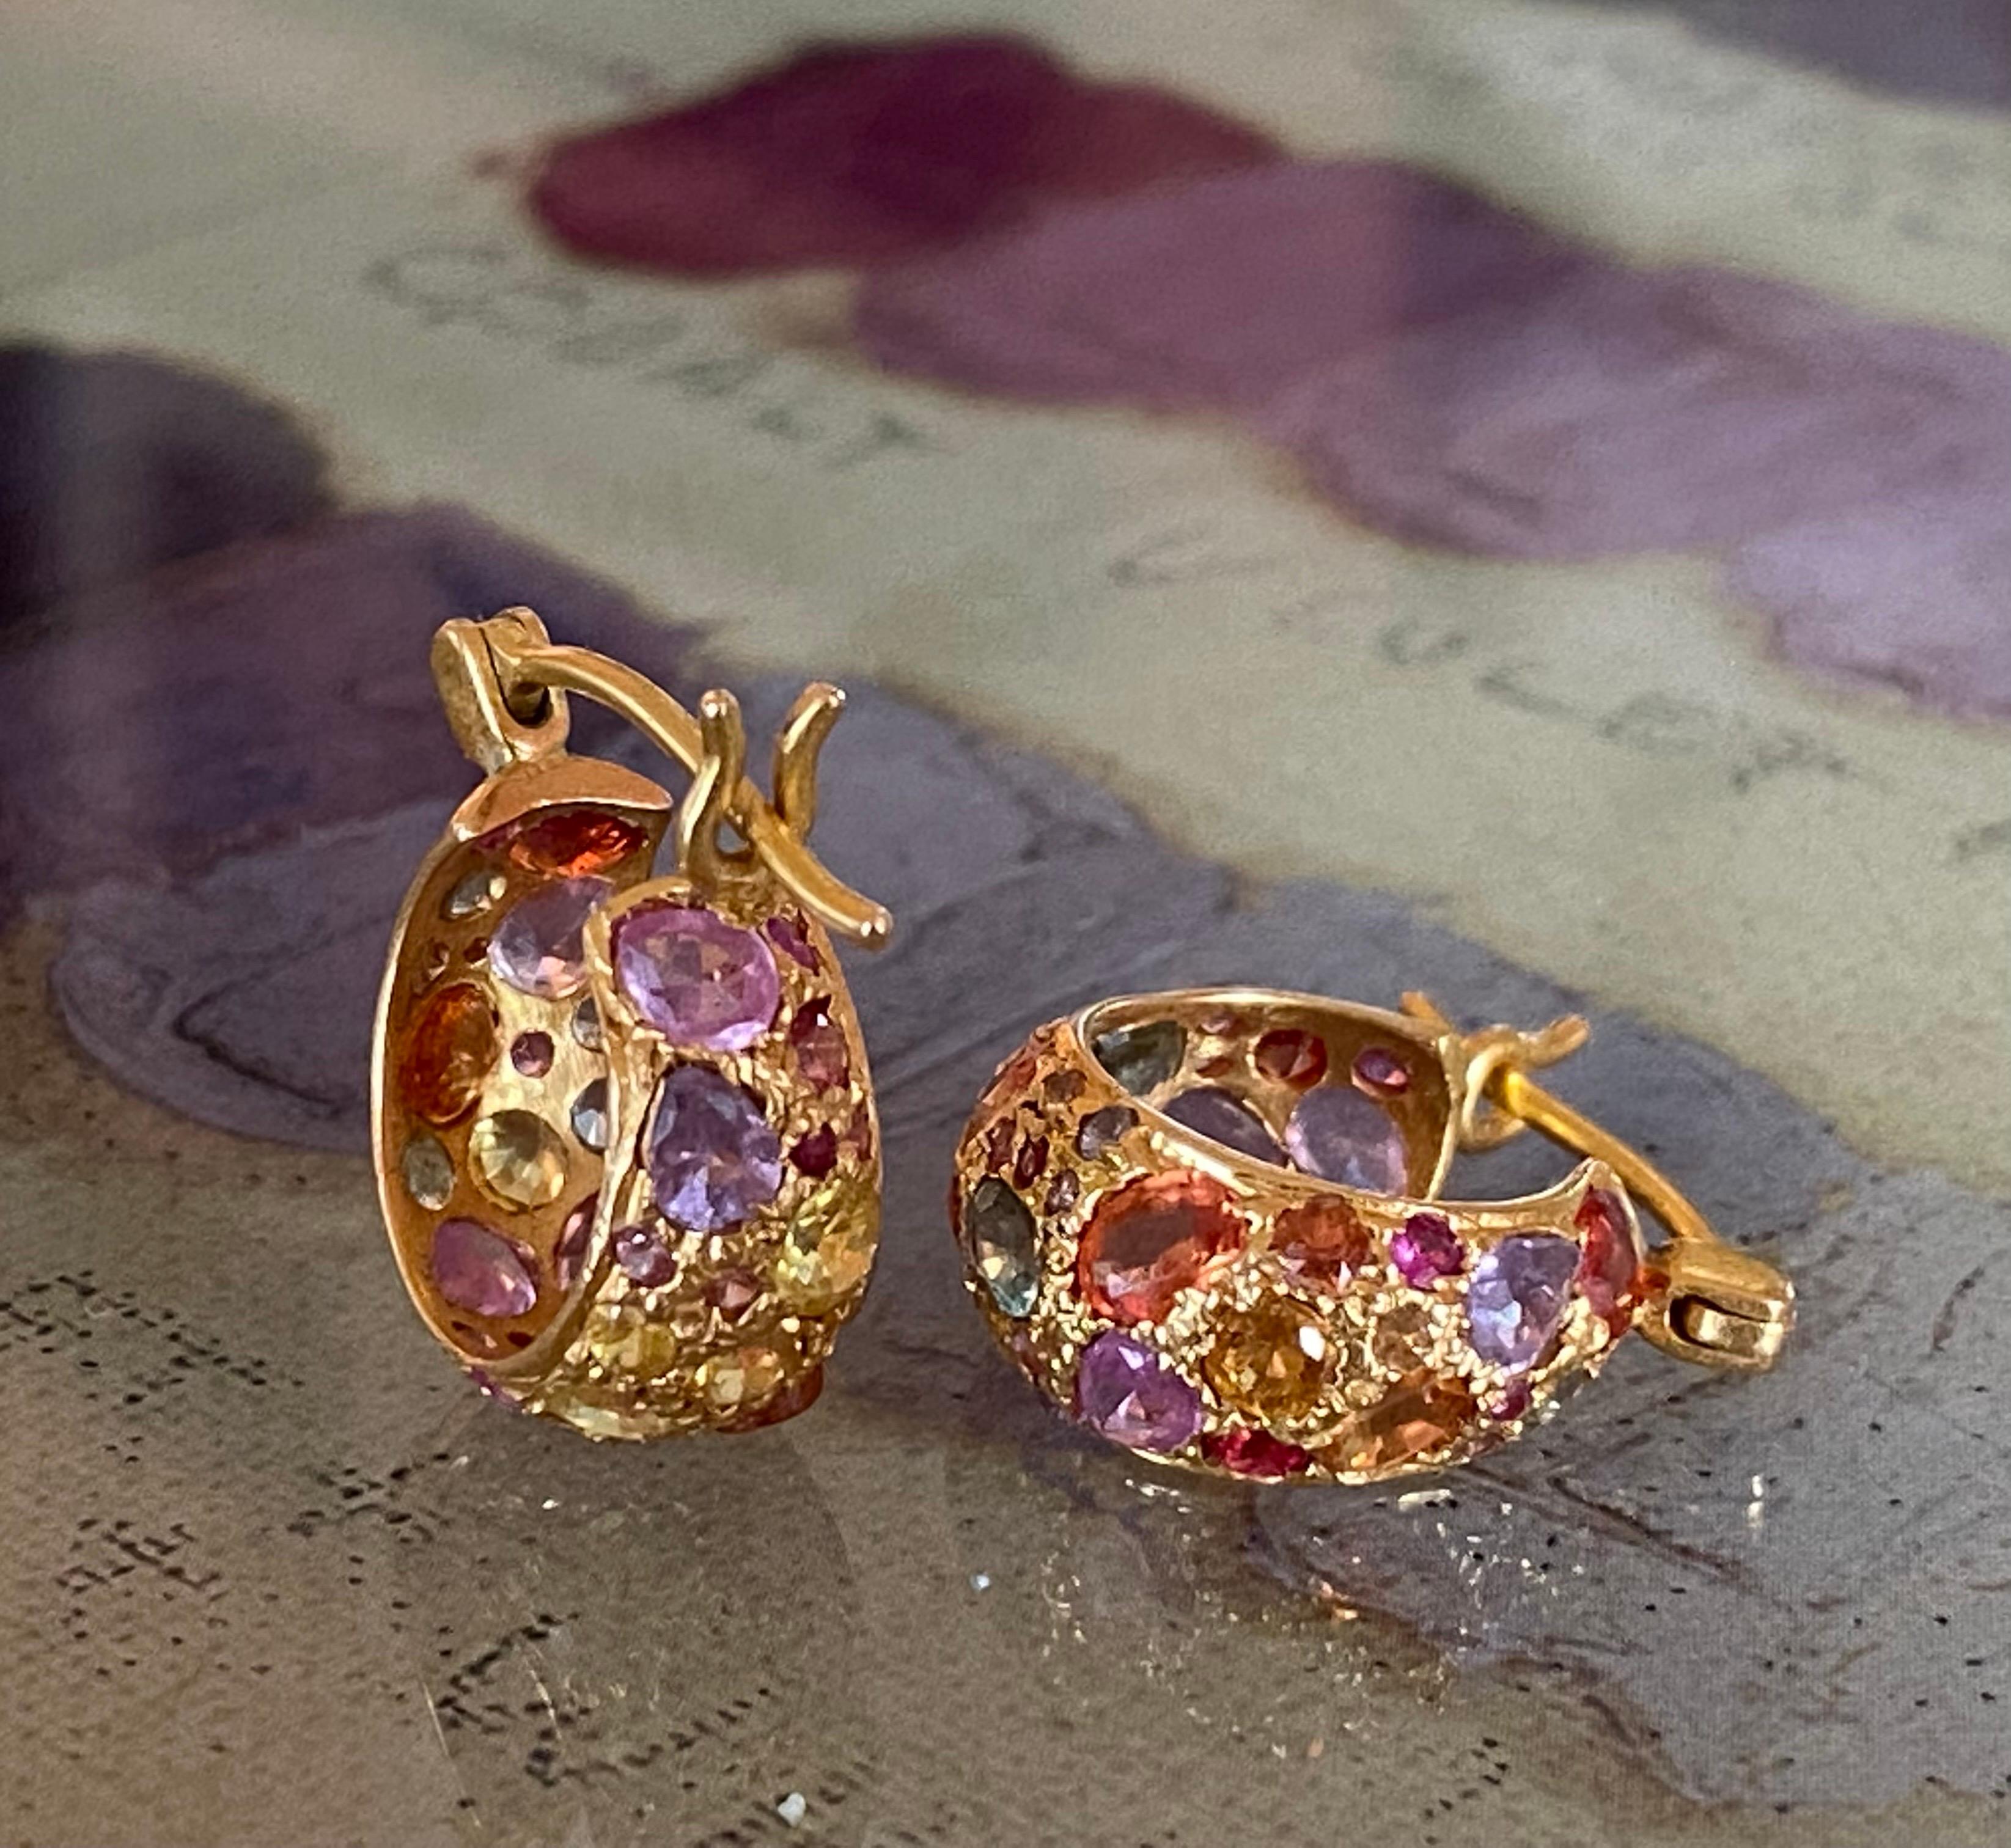 Designed by award winning jewelry designer, Lauren Harper, these multicolor sapphire and 18kt Gold hoops will become your favorite go to earring! Lightweight and secure on the ear, the variety of colors make these hoops the perfect to complete every